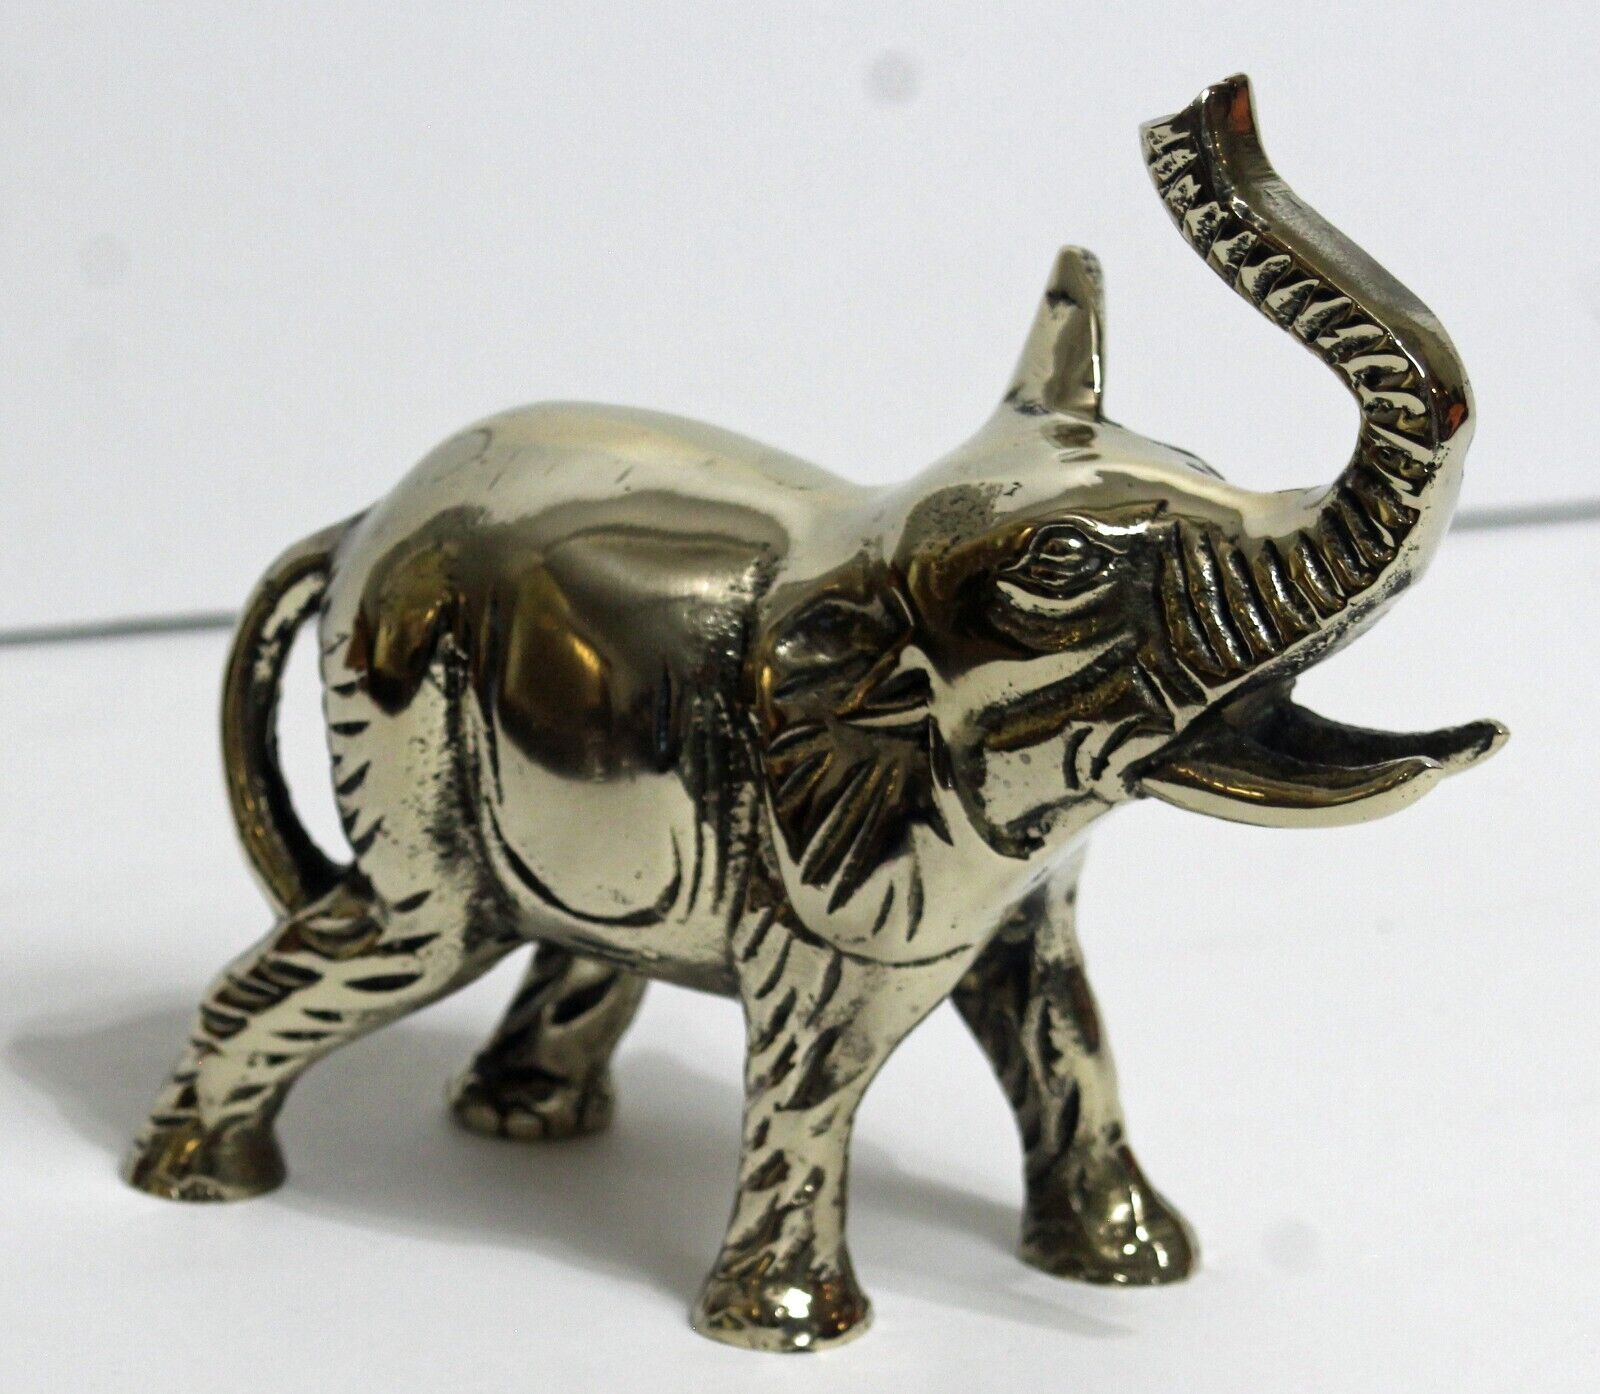 Vintage Solid Brass Elephant Statue 4” Tall